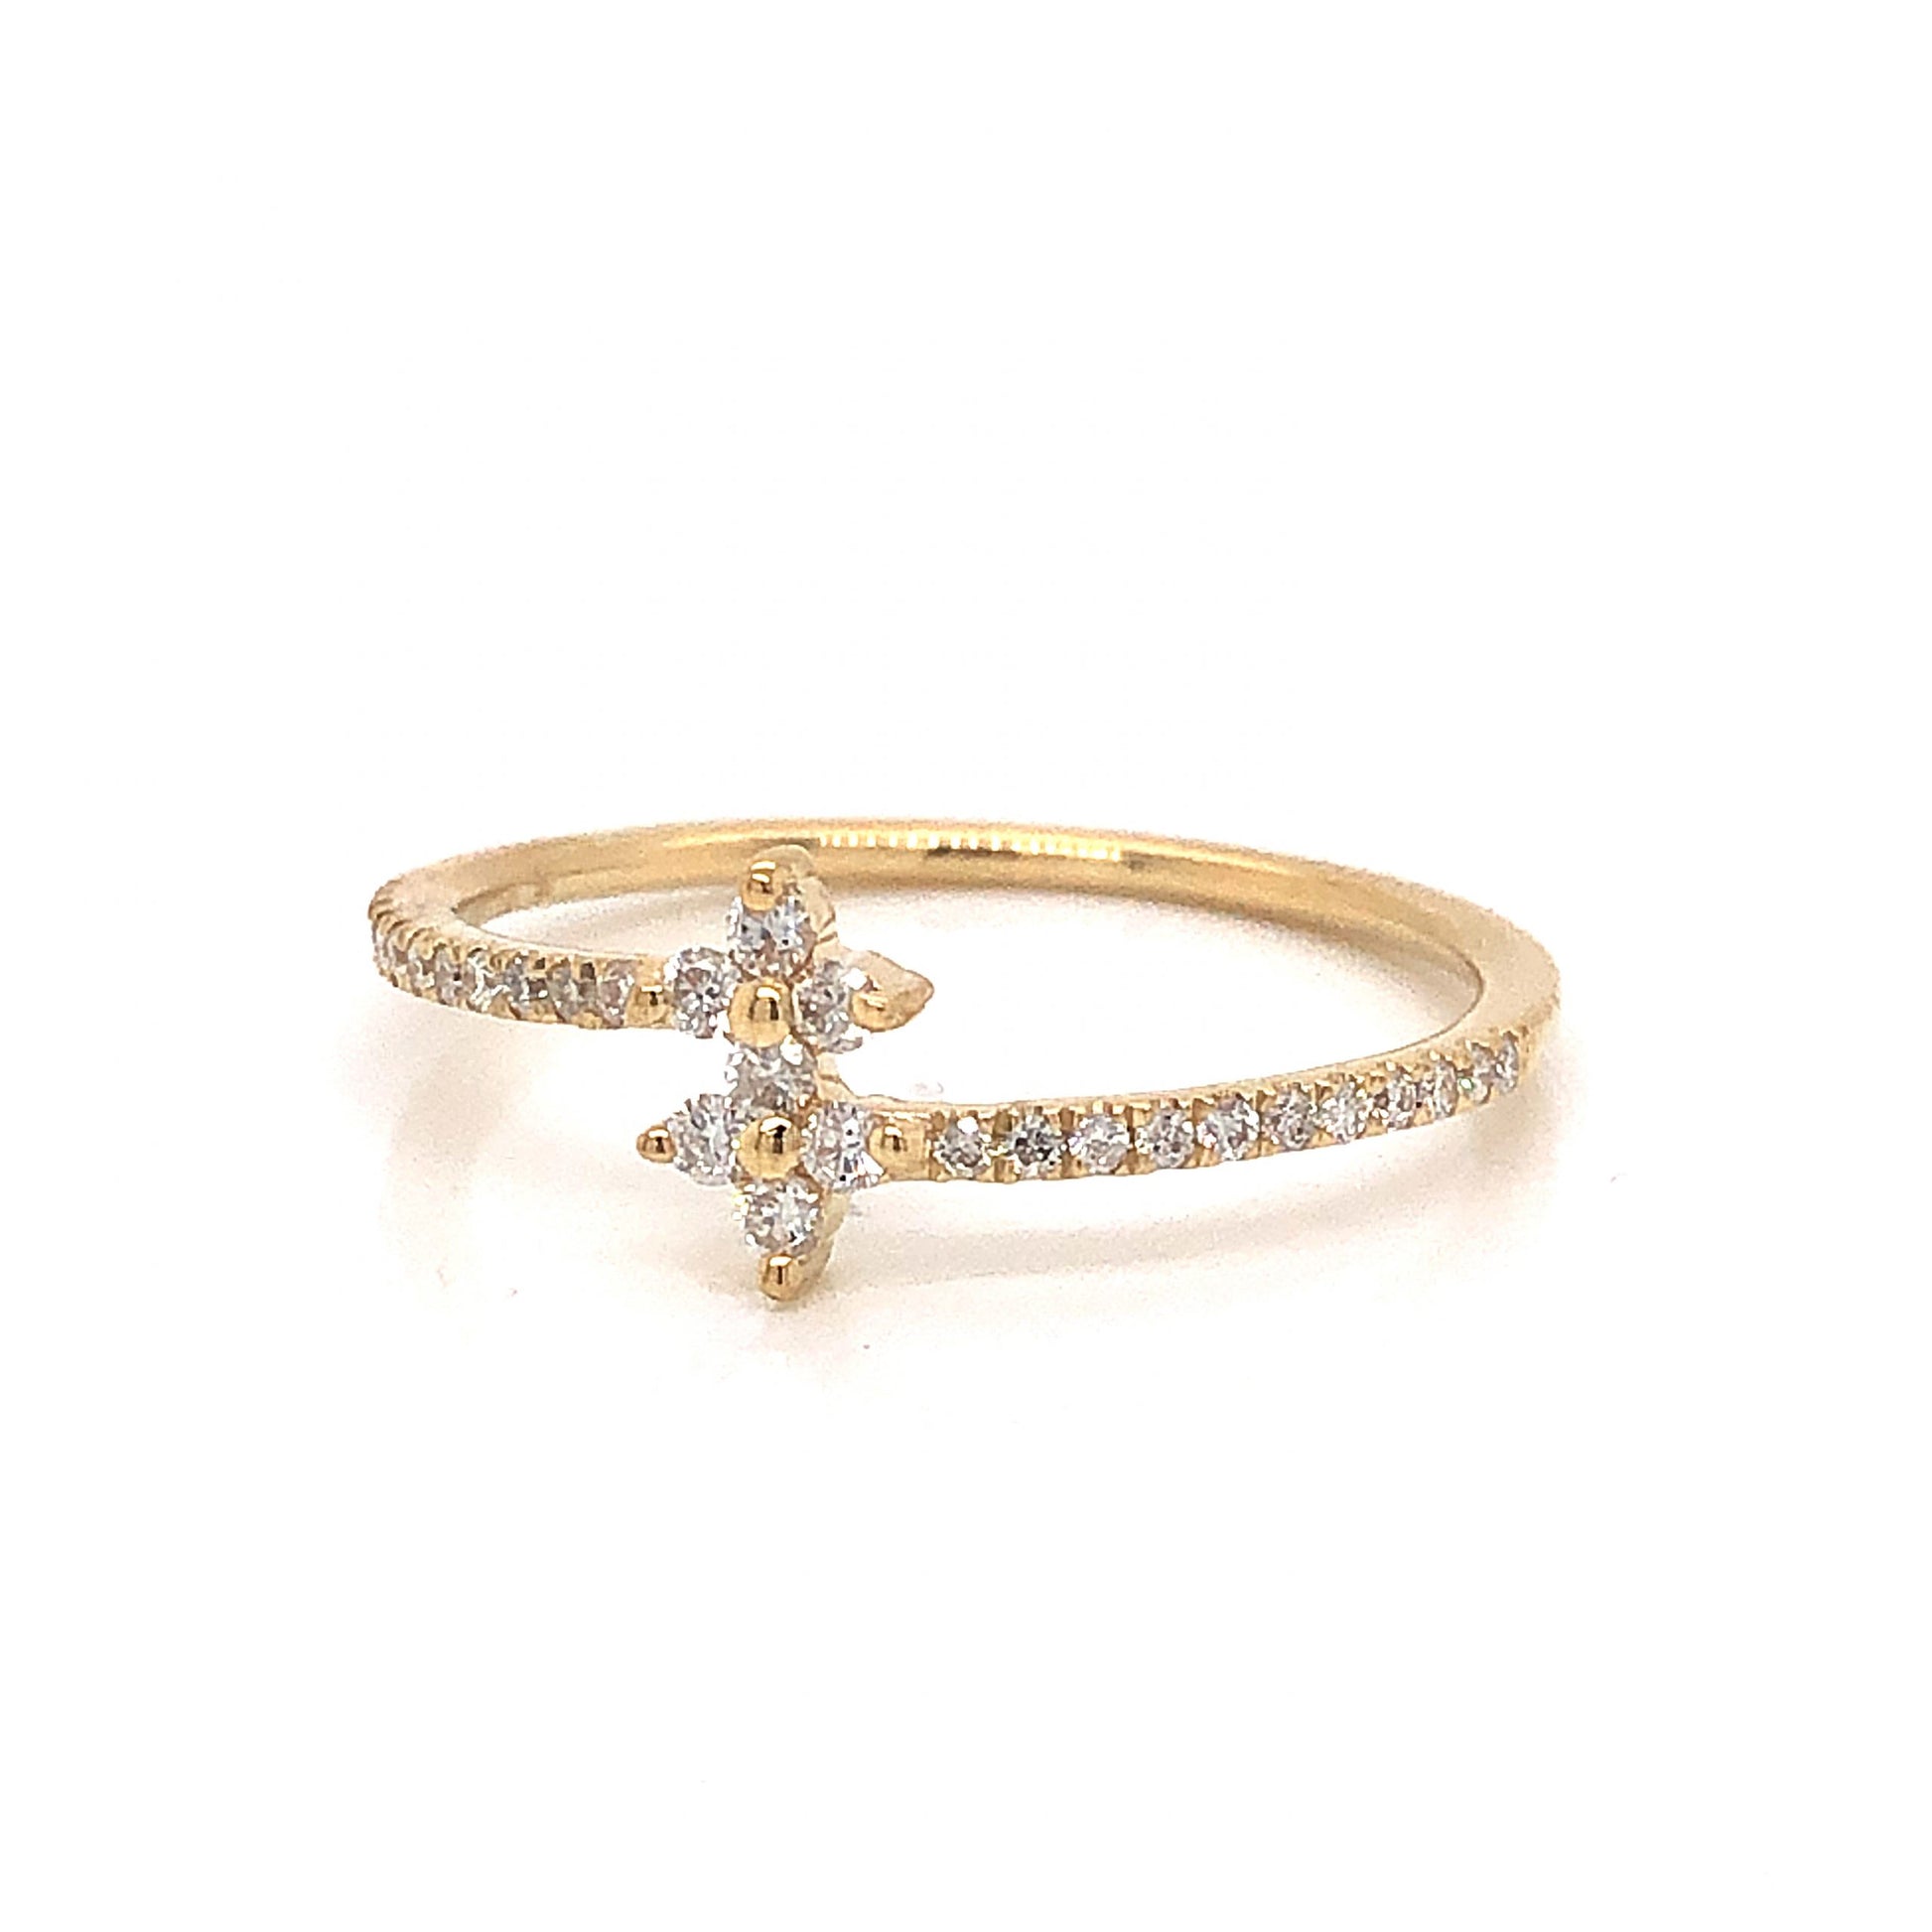 .13 Pave Diamond Cluster Stacking Ring in 14k Yellow GoldComposition: 14 Karat Yellow GoldRing Size: 6.5Total Diamond Weight: .13 ctTotal Gram Weight: 1.1 gInscription: 14k 